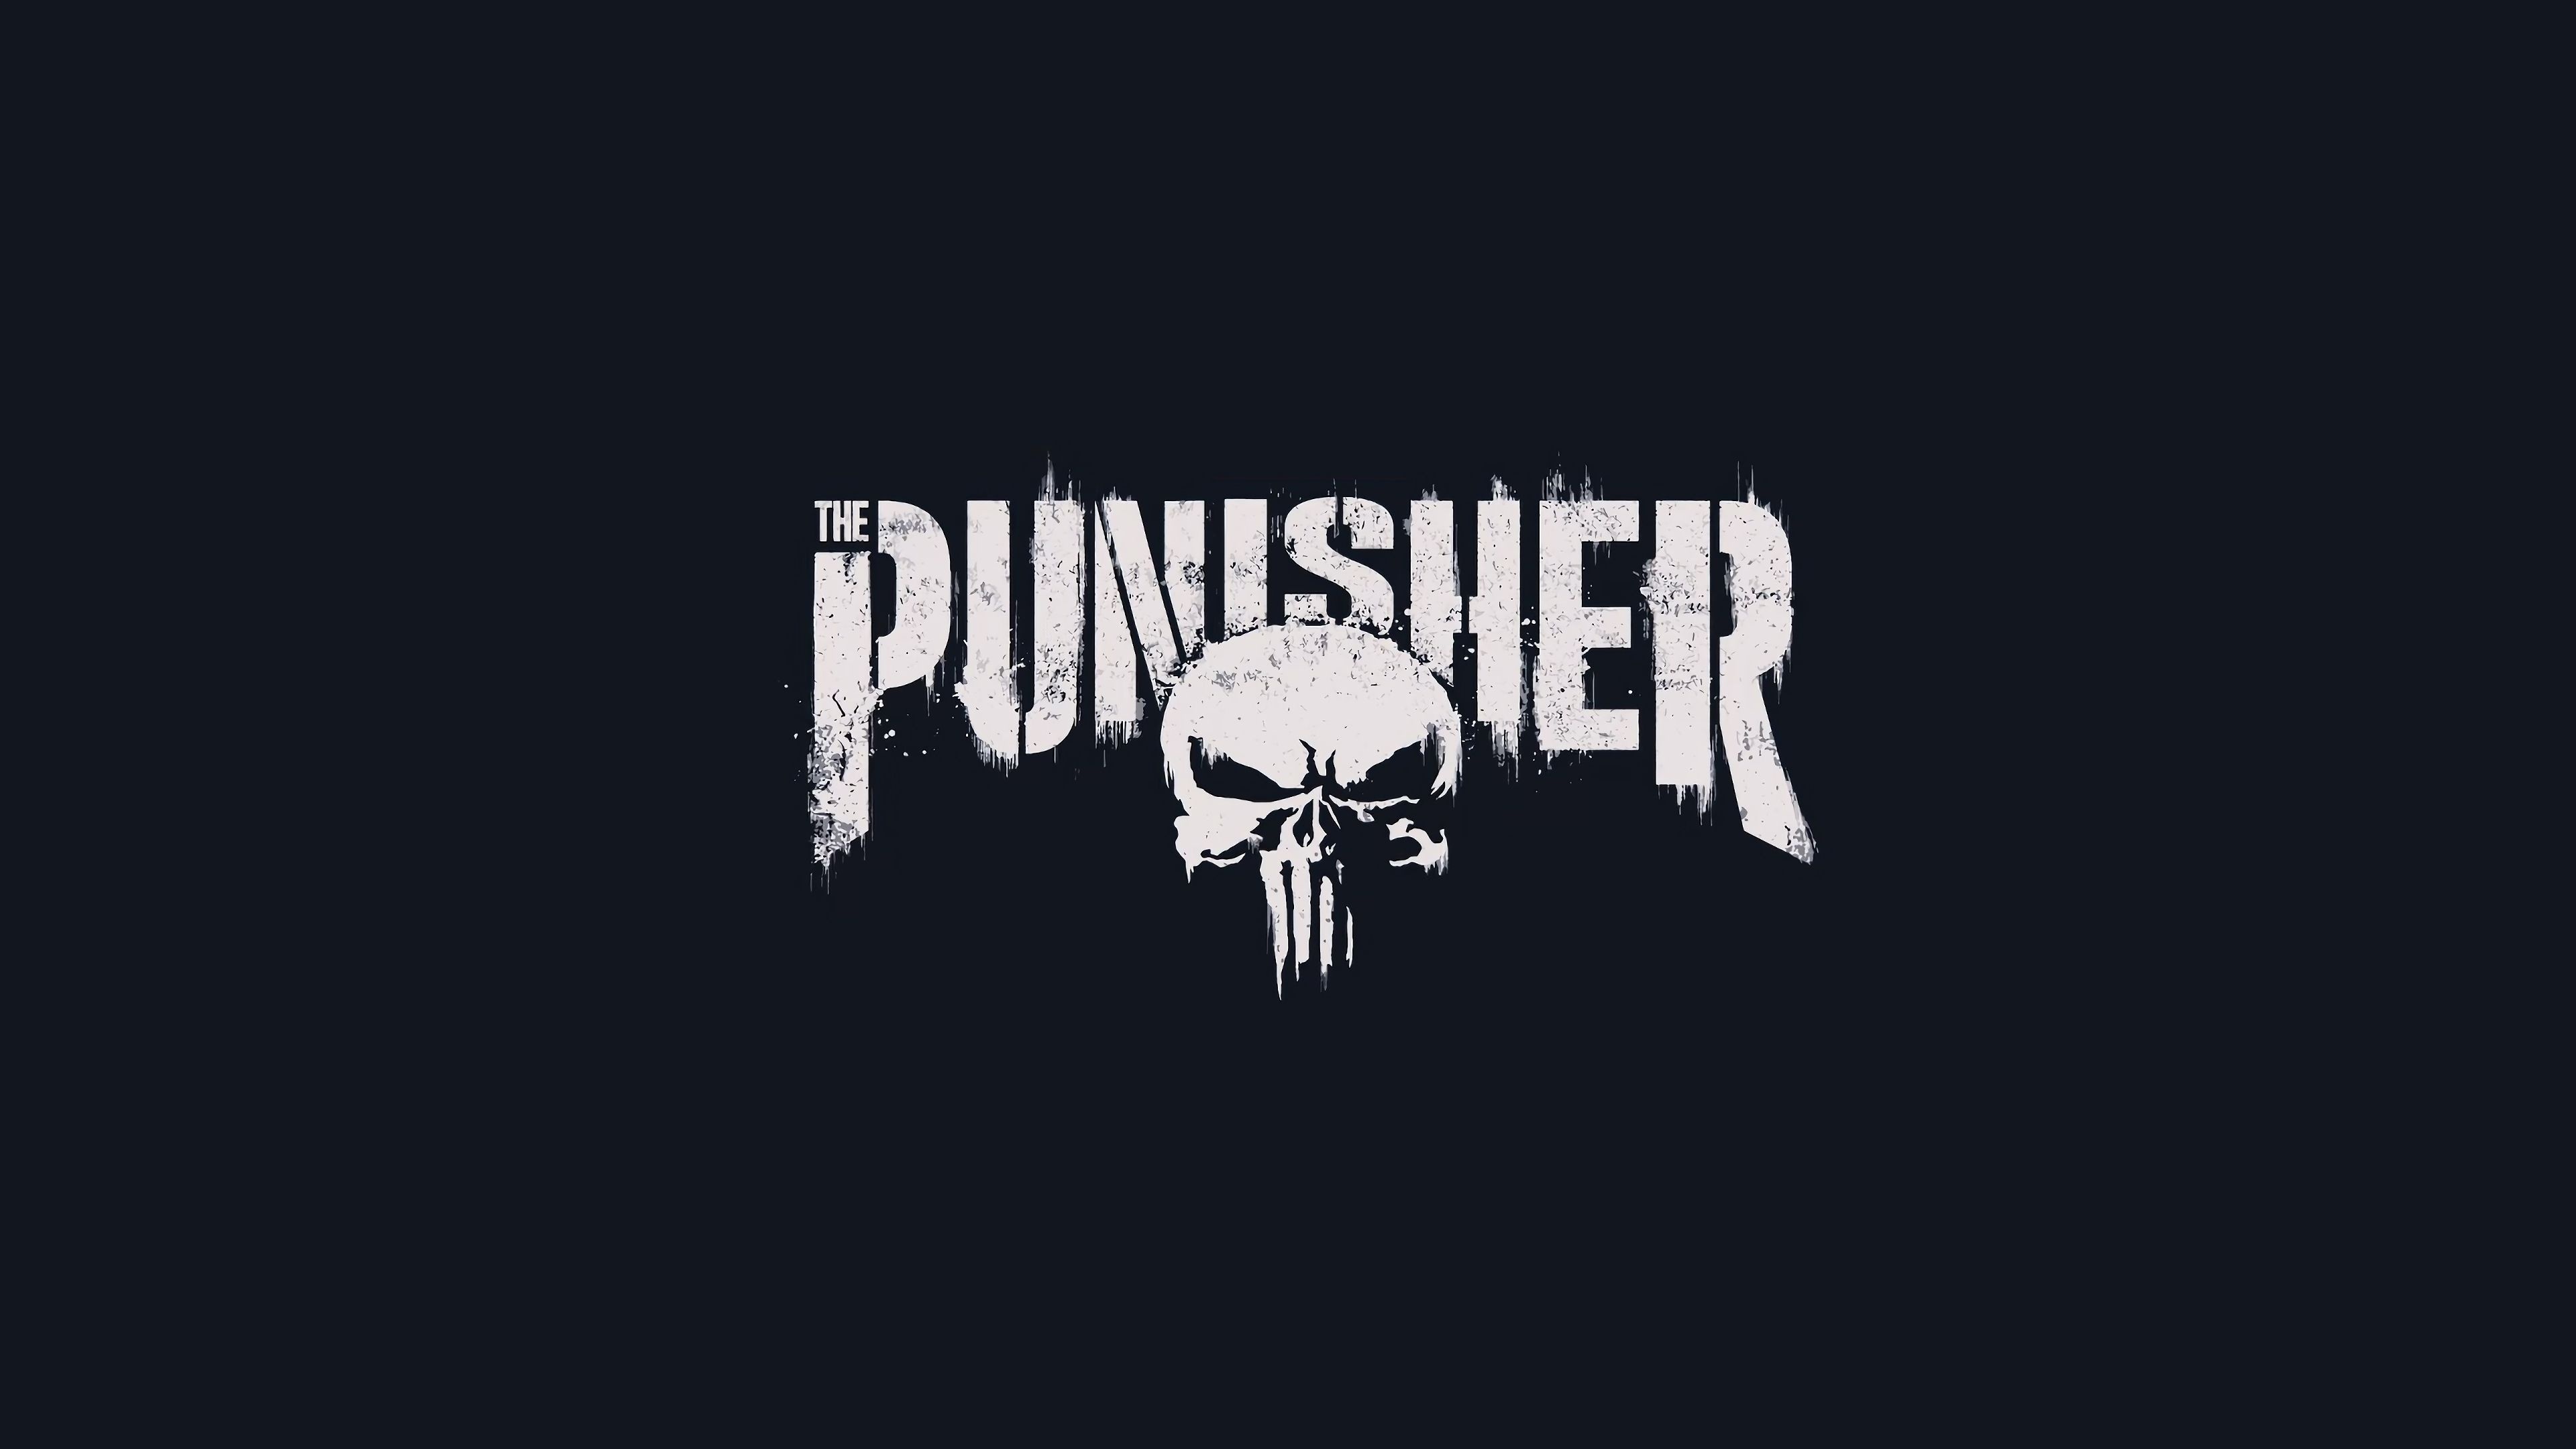 The Punisher TV Series, 4K wallpapers, Powerful protagonist, Intense imagery, 3840x2160 4K Desktop